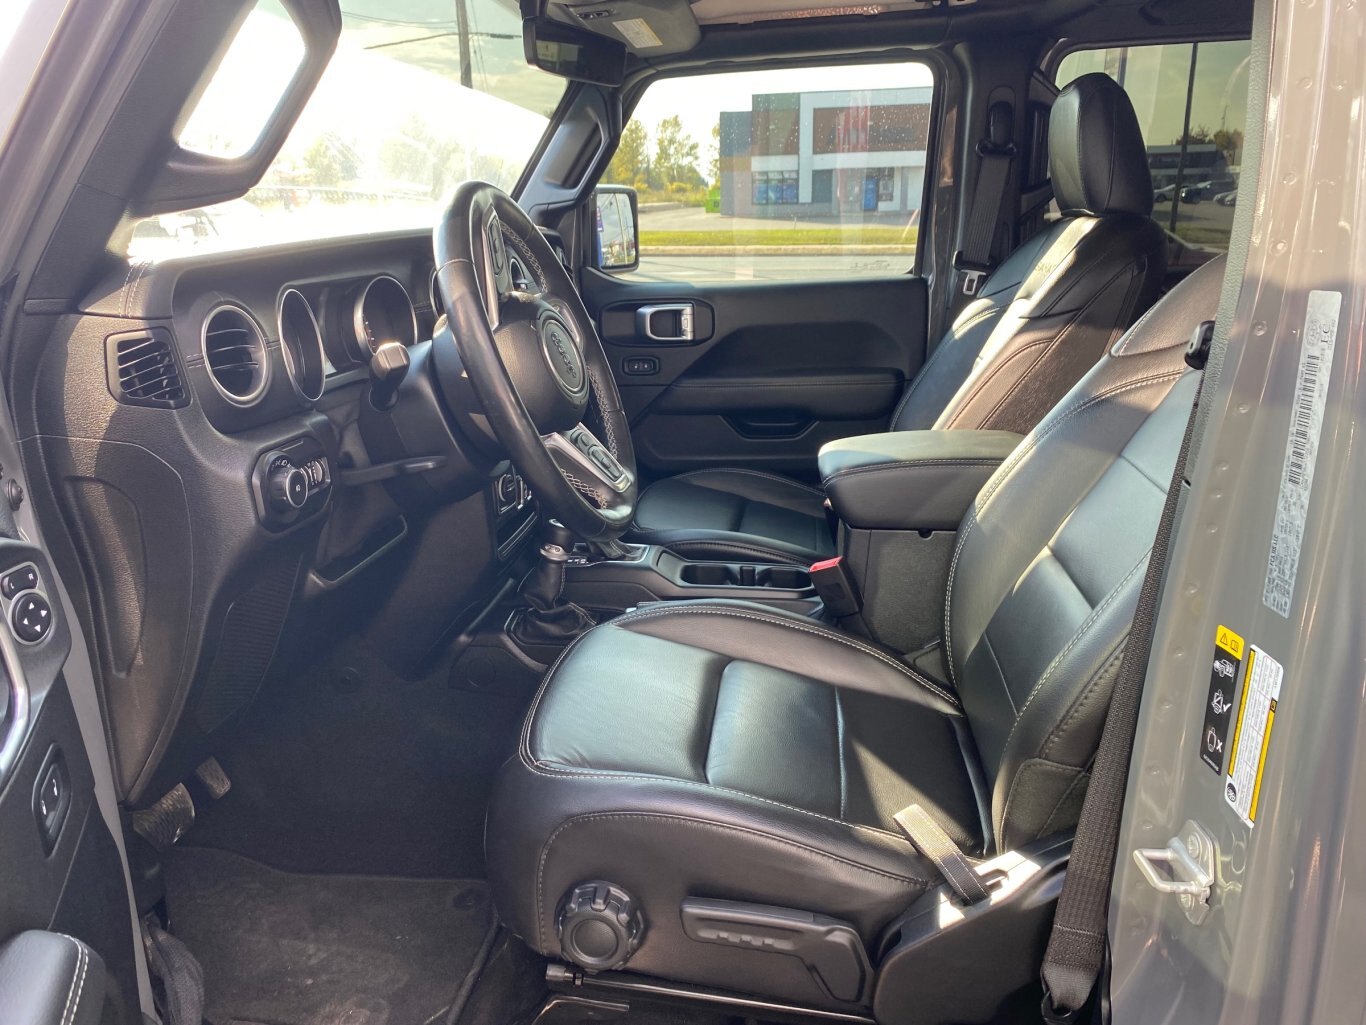 2020 JEEP WRANGLER UNLIMITED SAHARA 4X4 WITH LEATHER SEATS, HEATED SEATS, HEATED STEERING WHEEL, REAR VIEW CAMERA, REMOTE START AND NAVIGATION!!